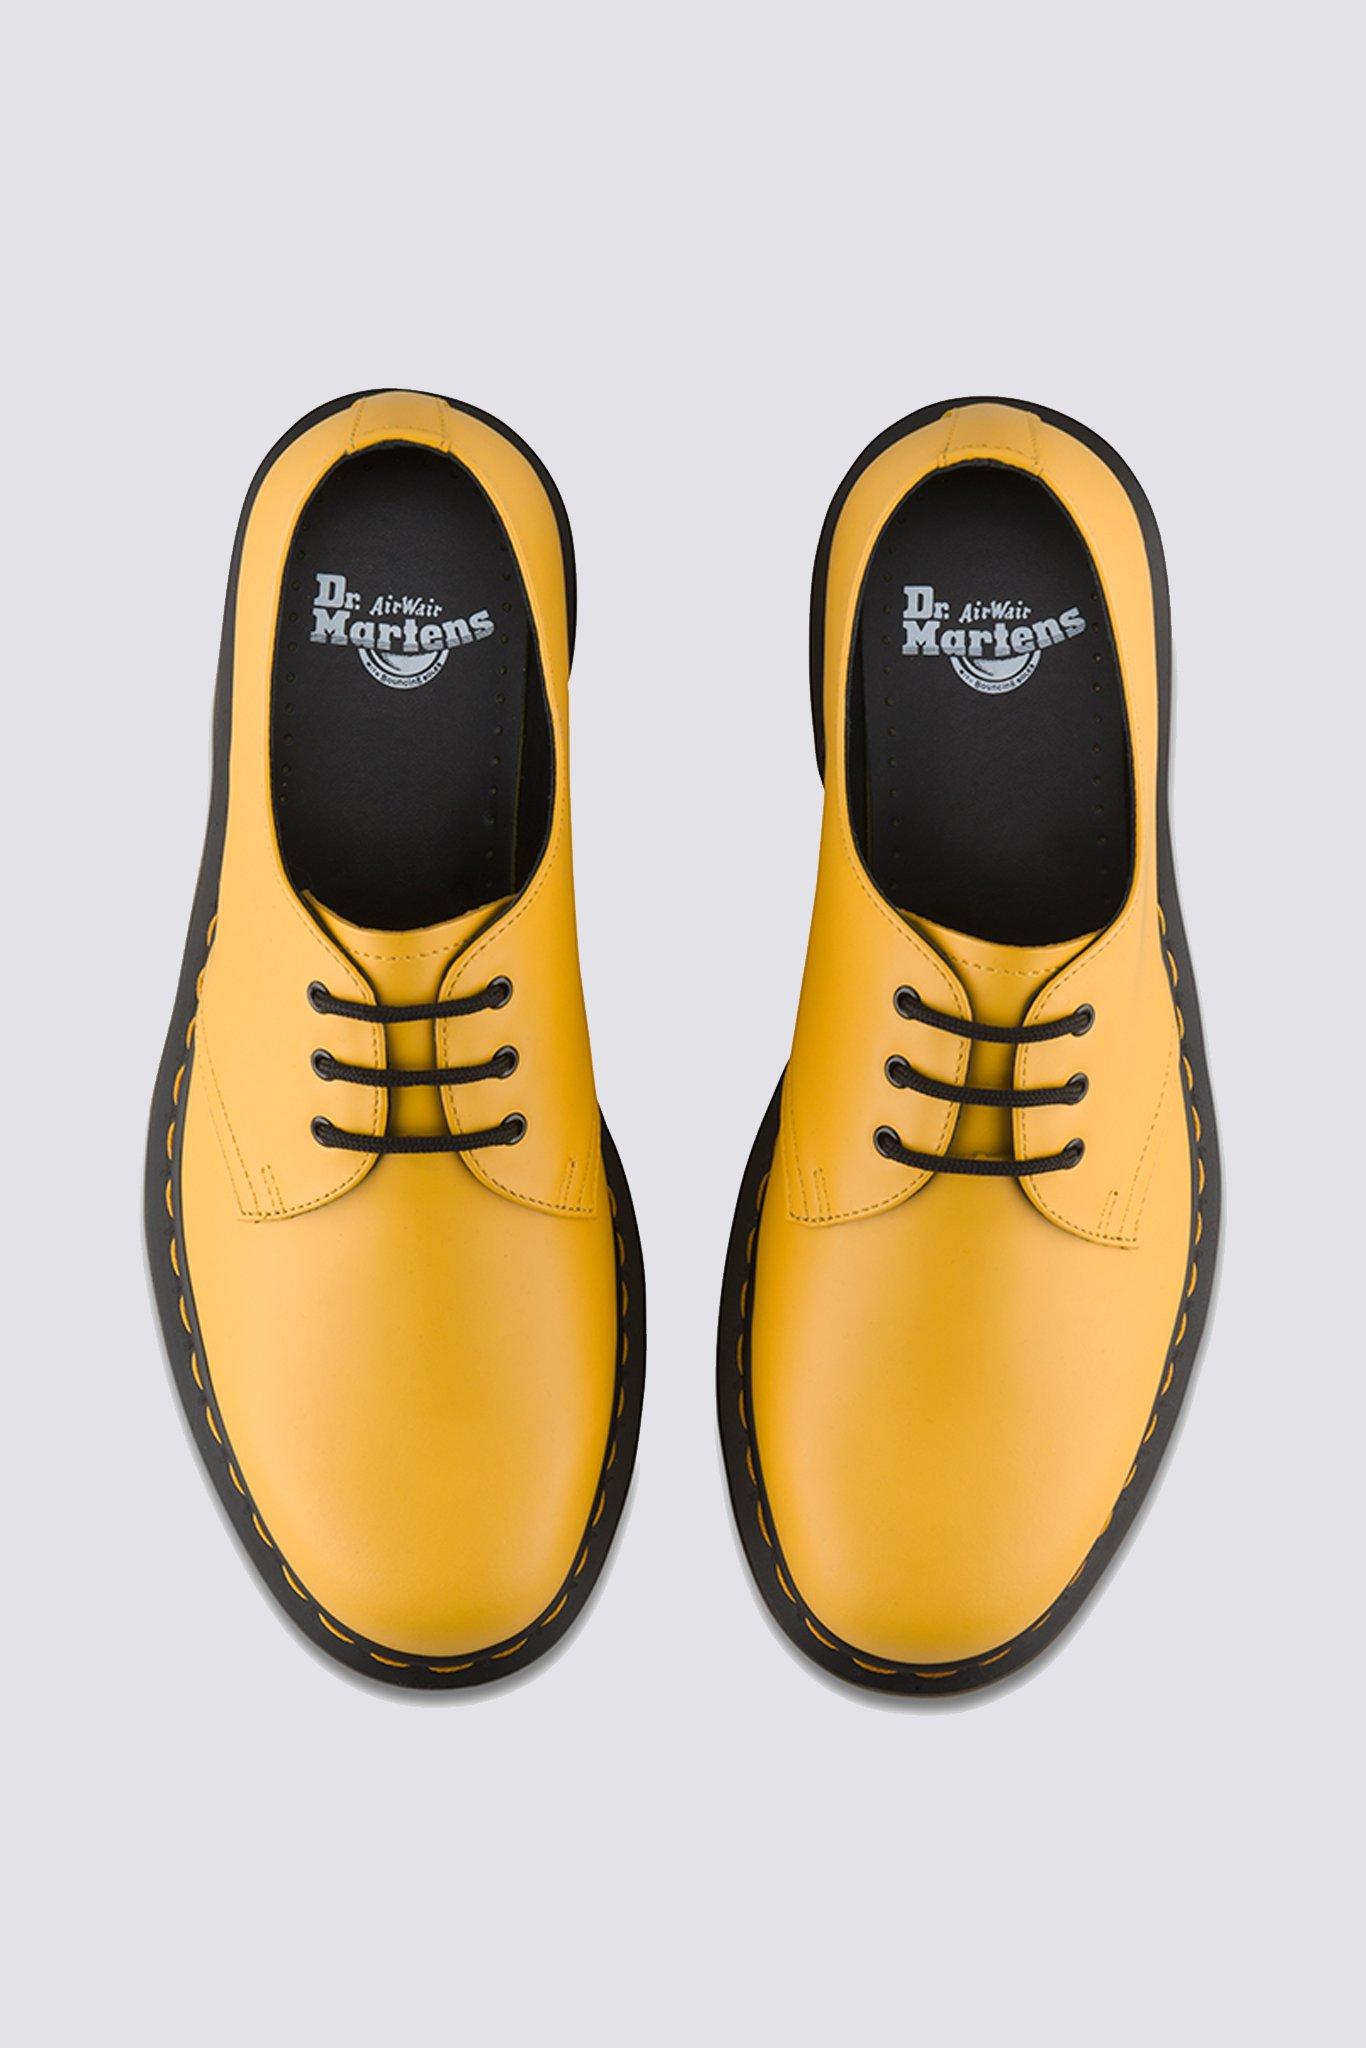 dr martens 1461 yellow